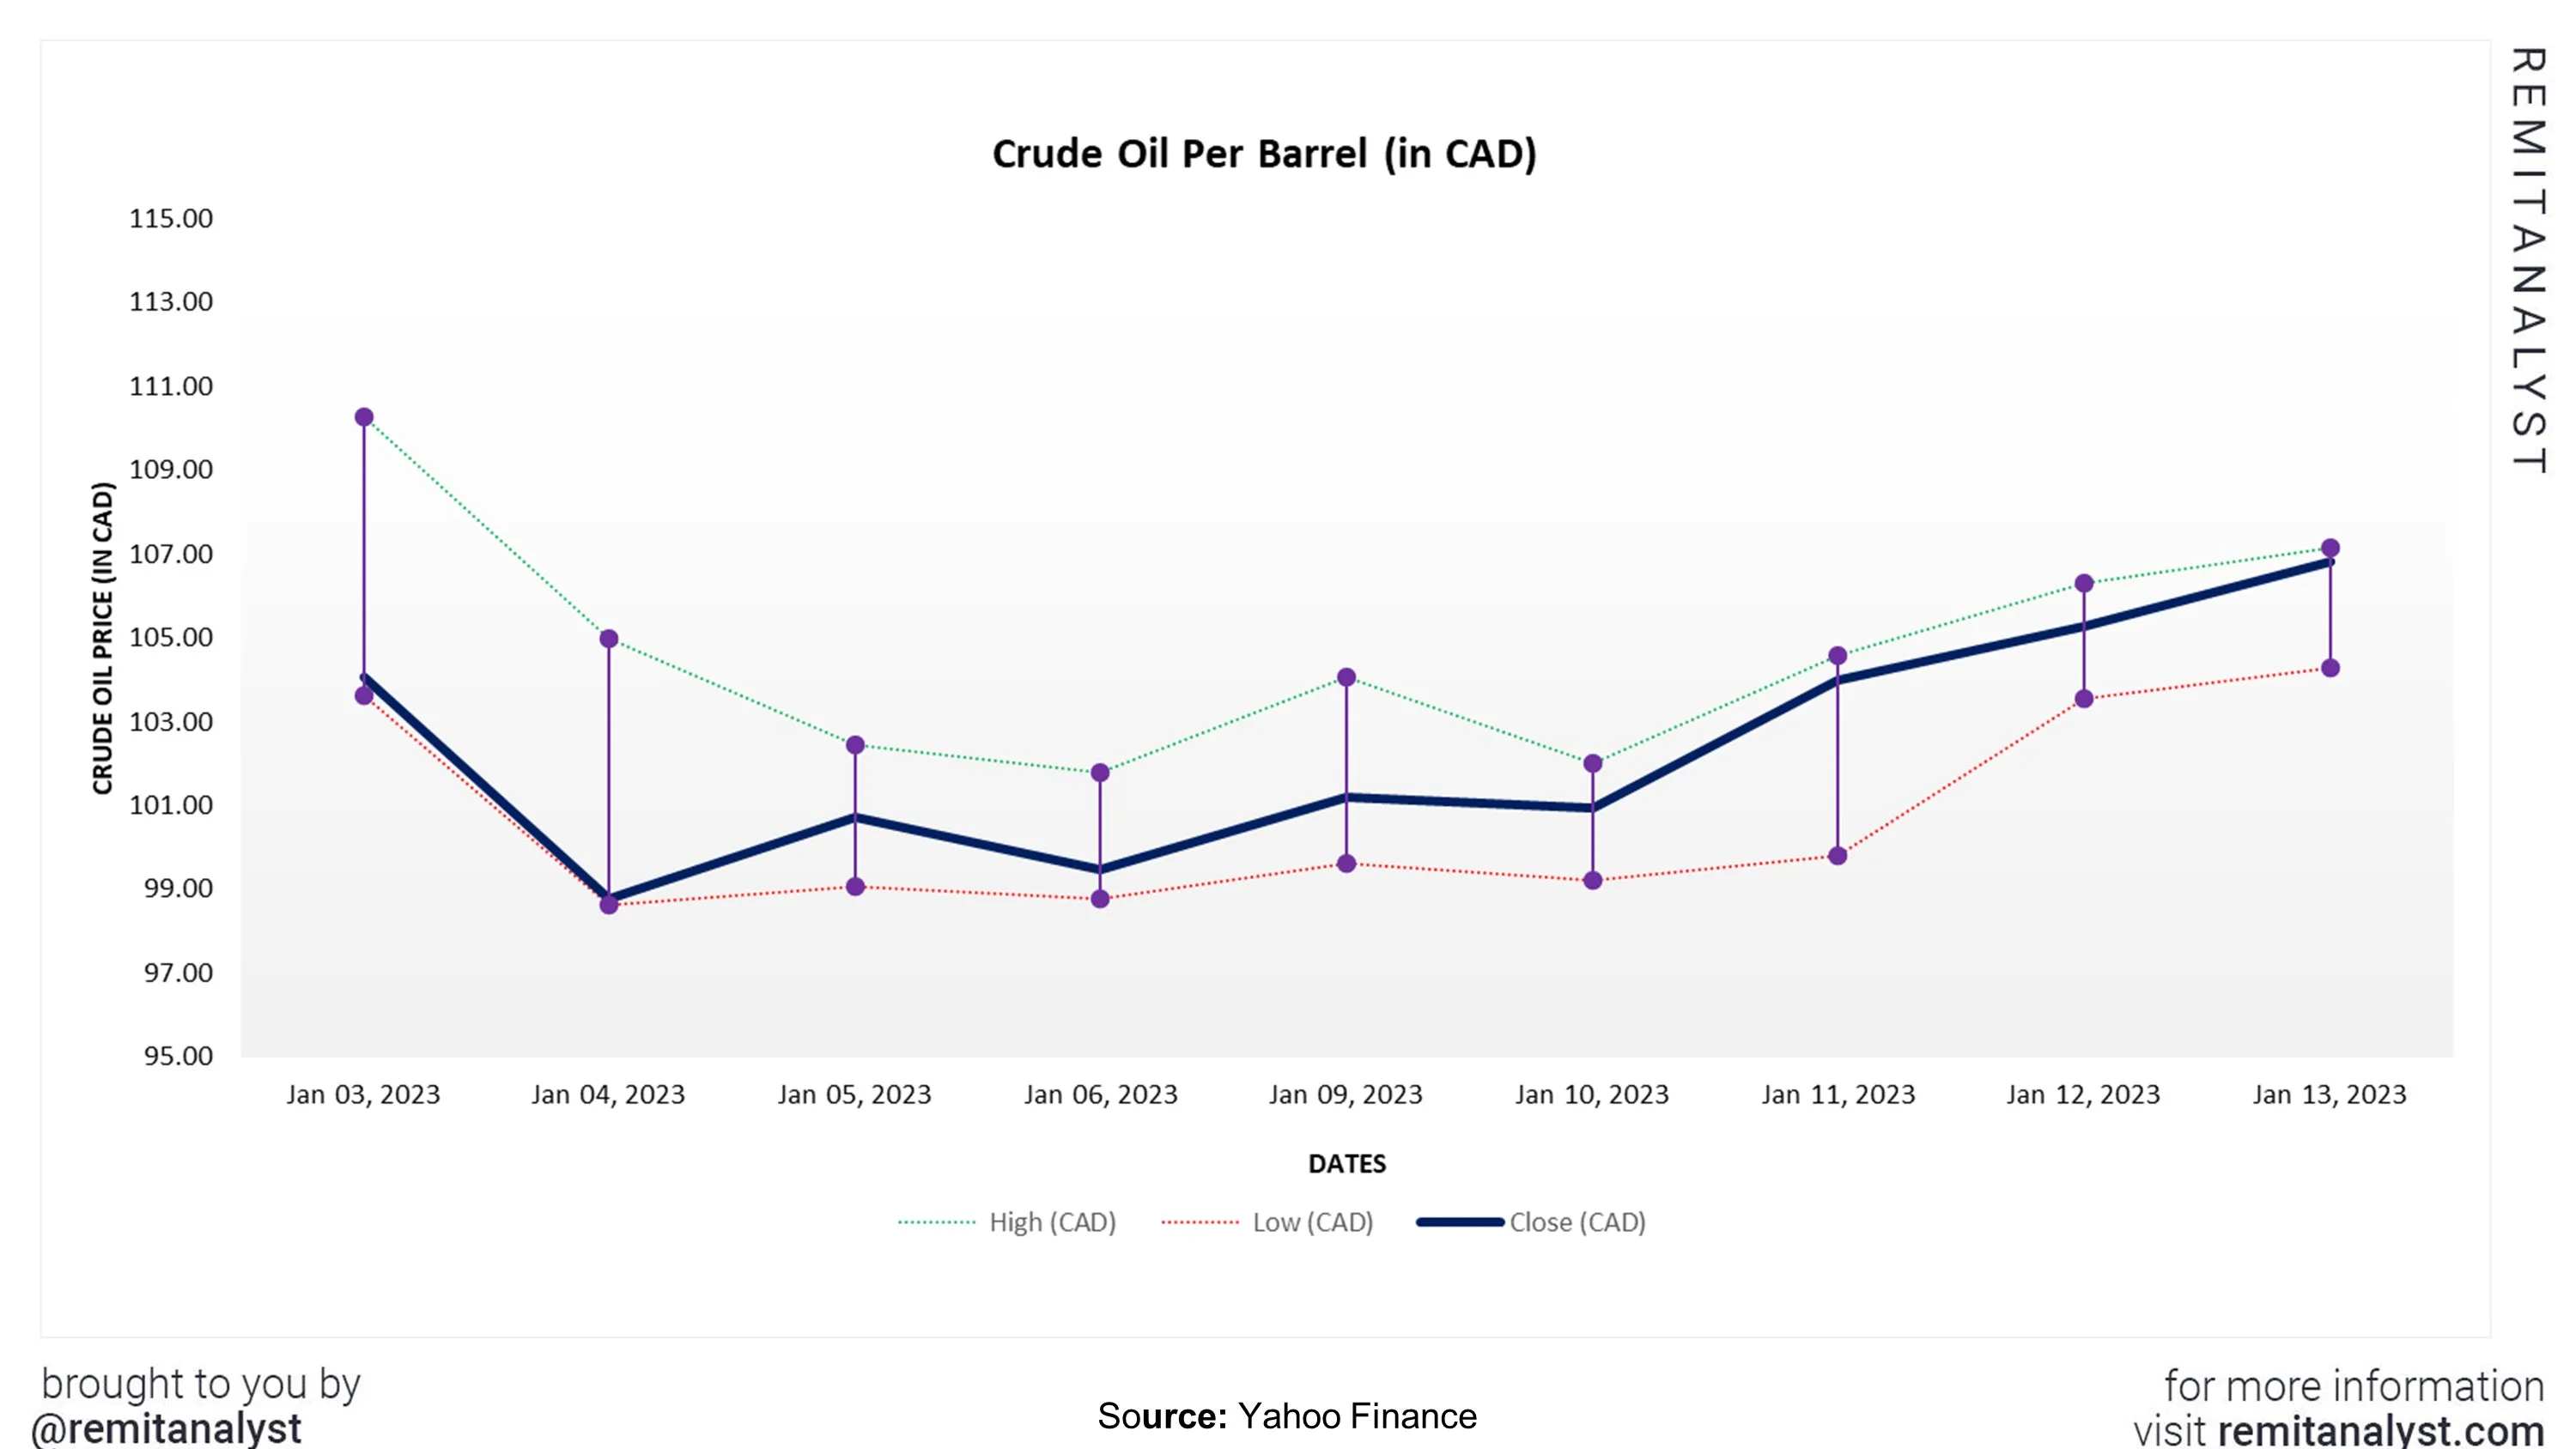 crude-oil-prices-canada-from-3-jan-2023-to-13-jan-2023